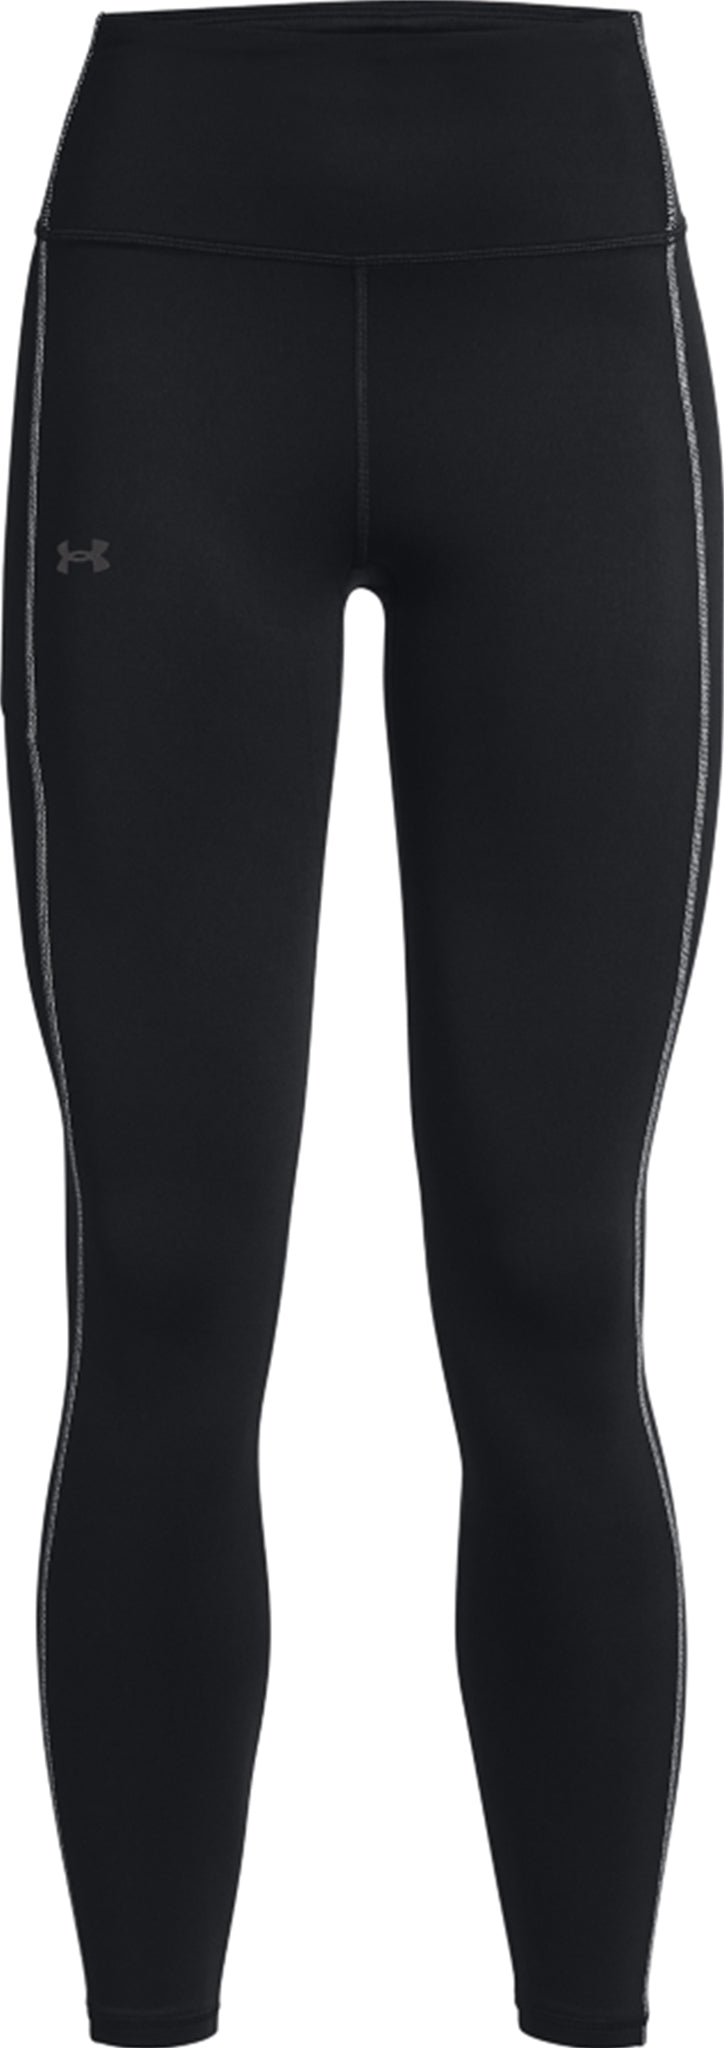 Legging woman Under Armour Train Cold Weather